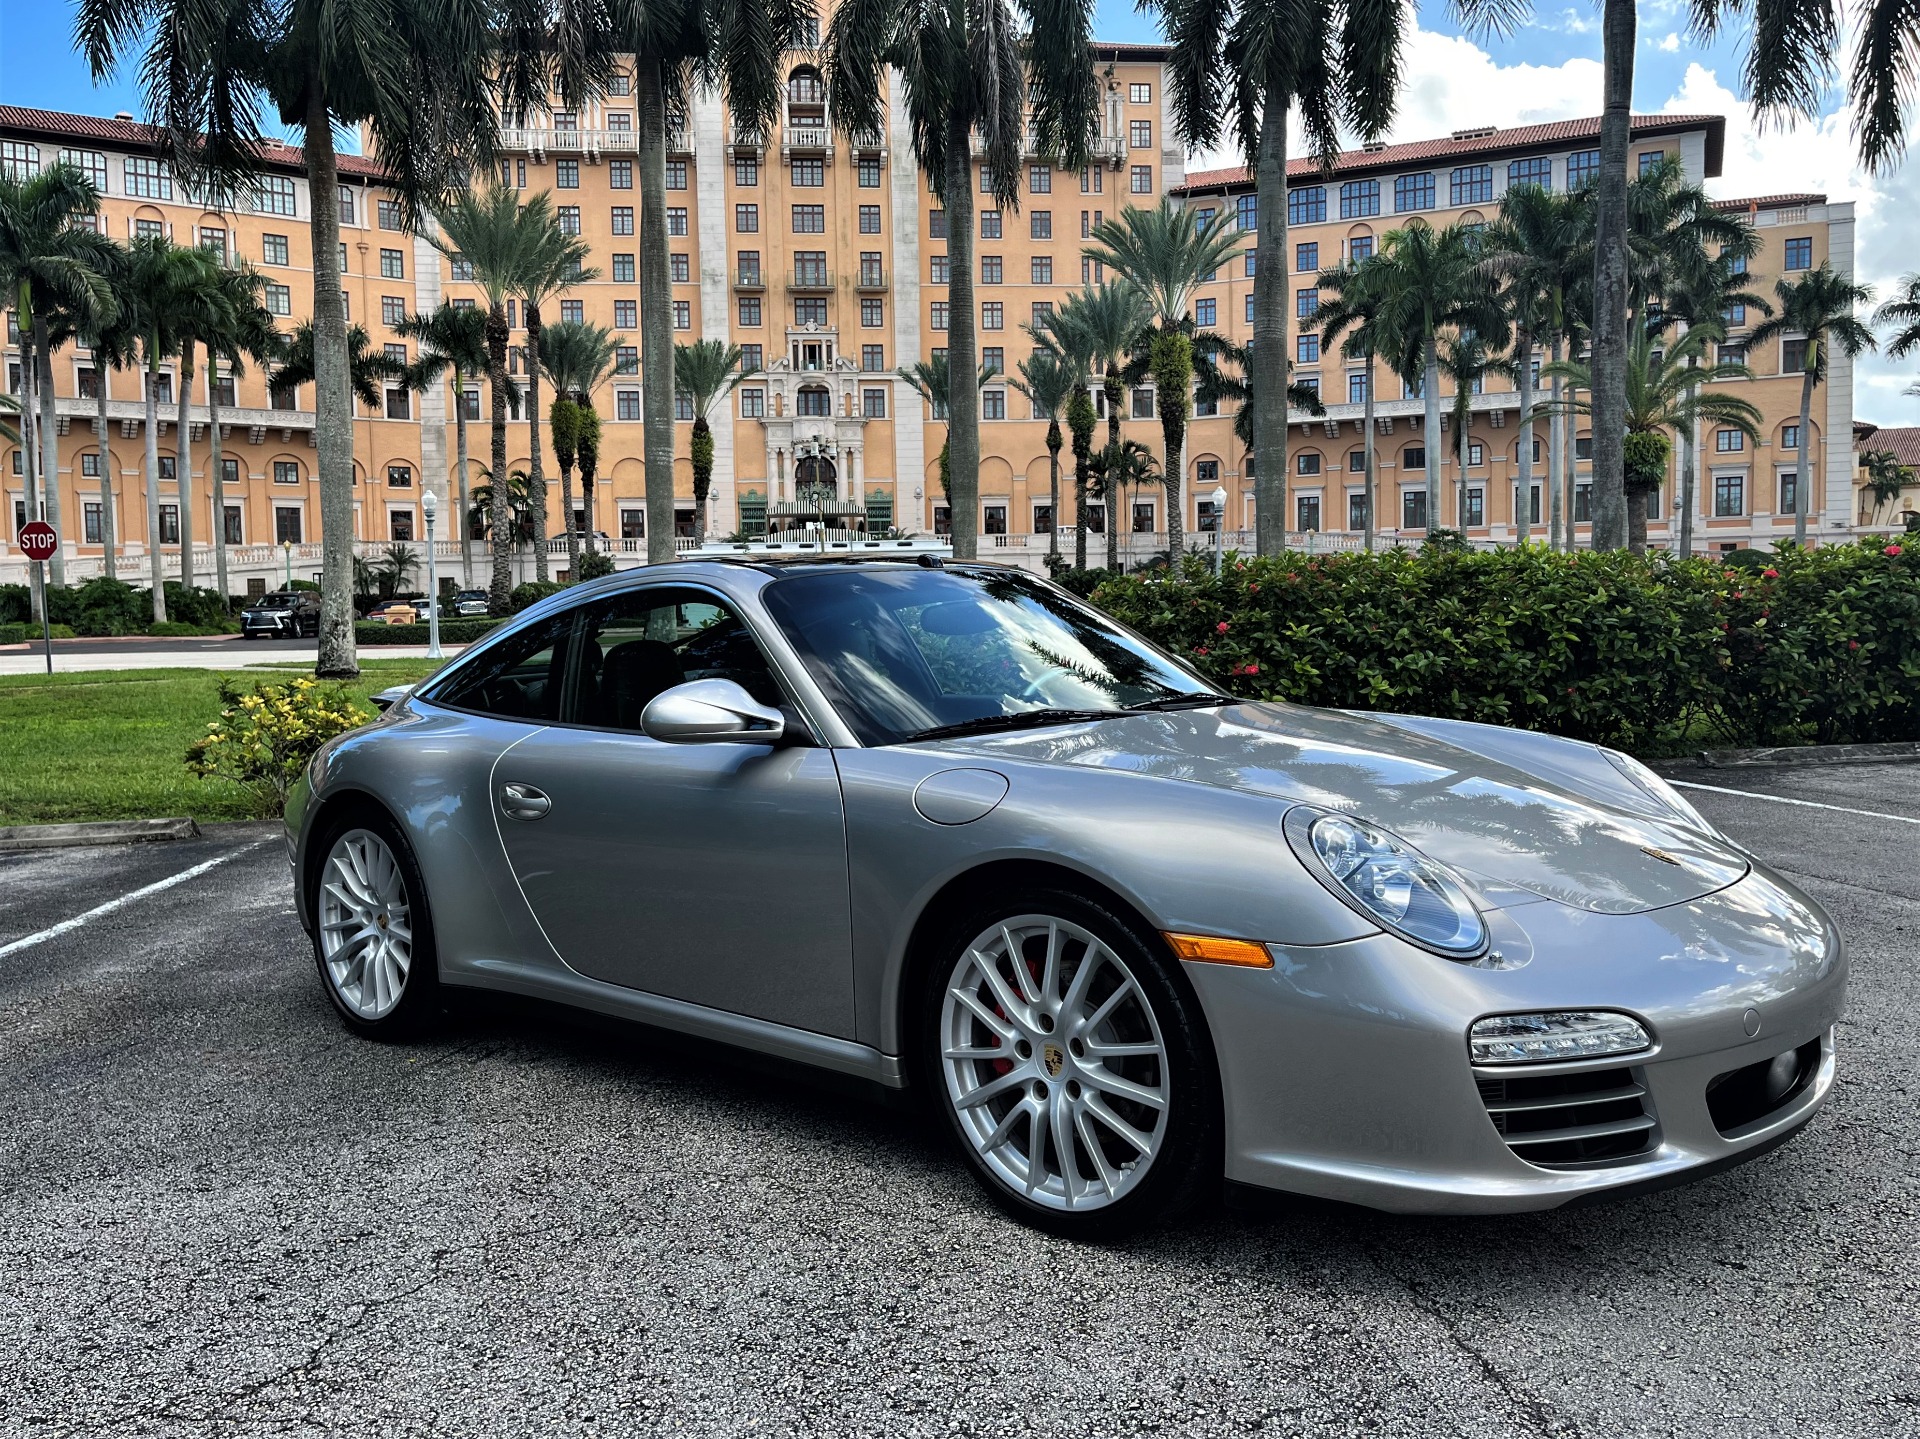 Used 2011 Porsche 911 Targa 4S for sale $88,850 at The Gables Sports Cars in Miami FL 33146 4